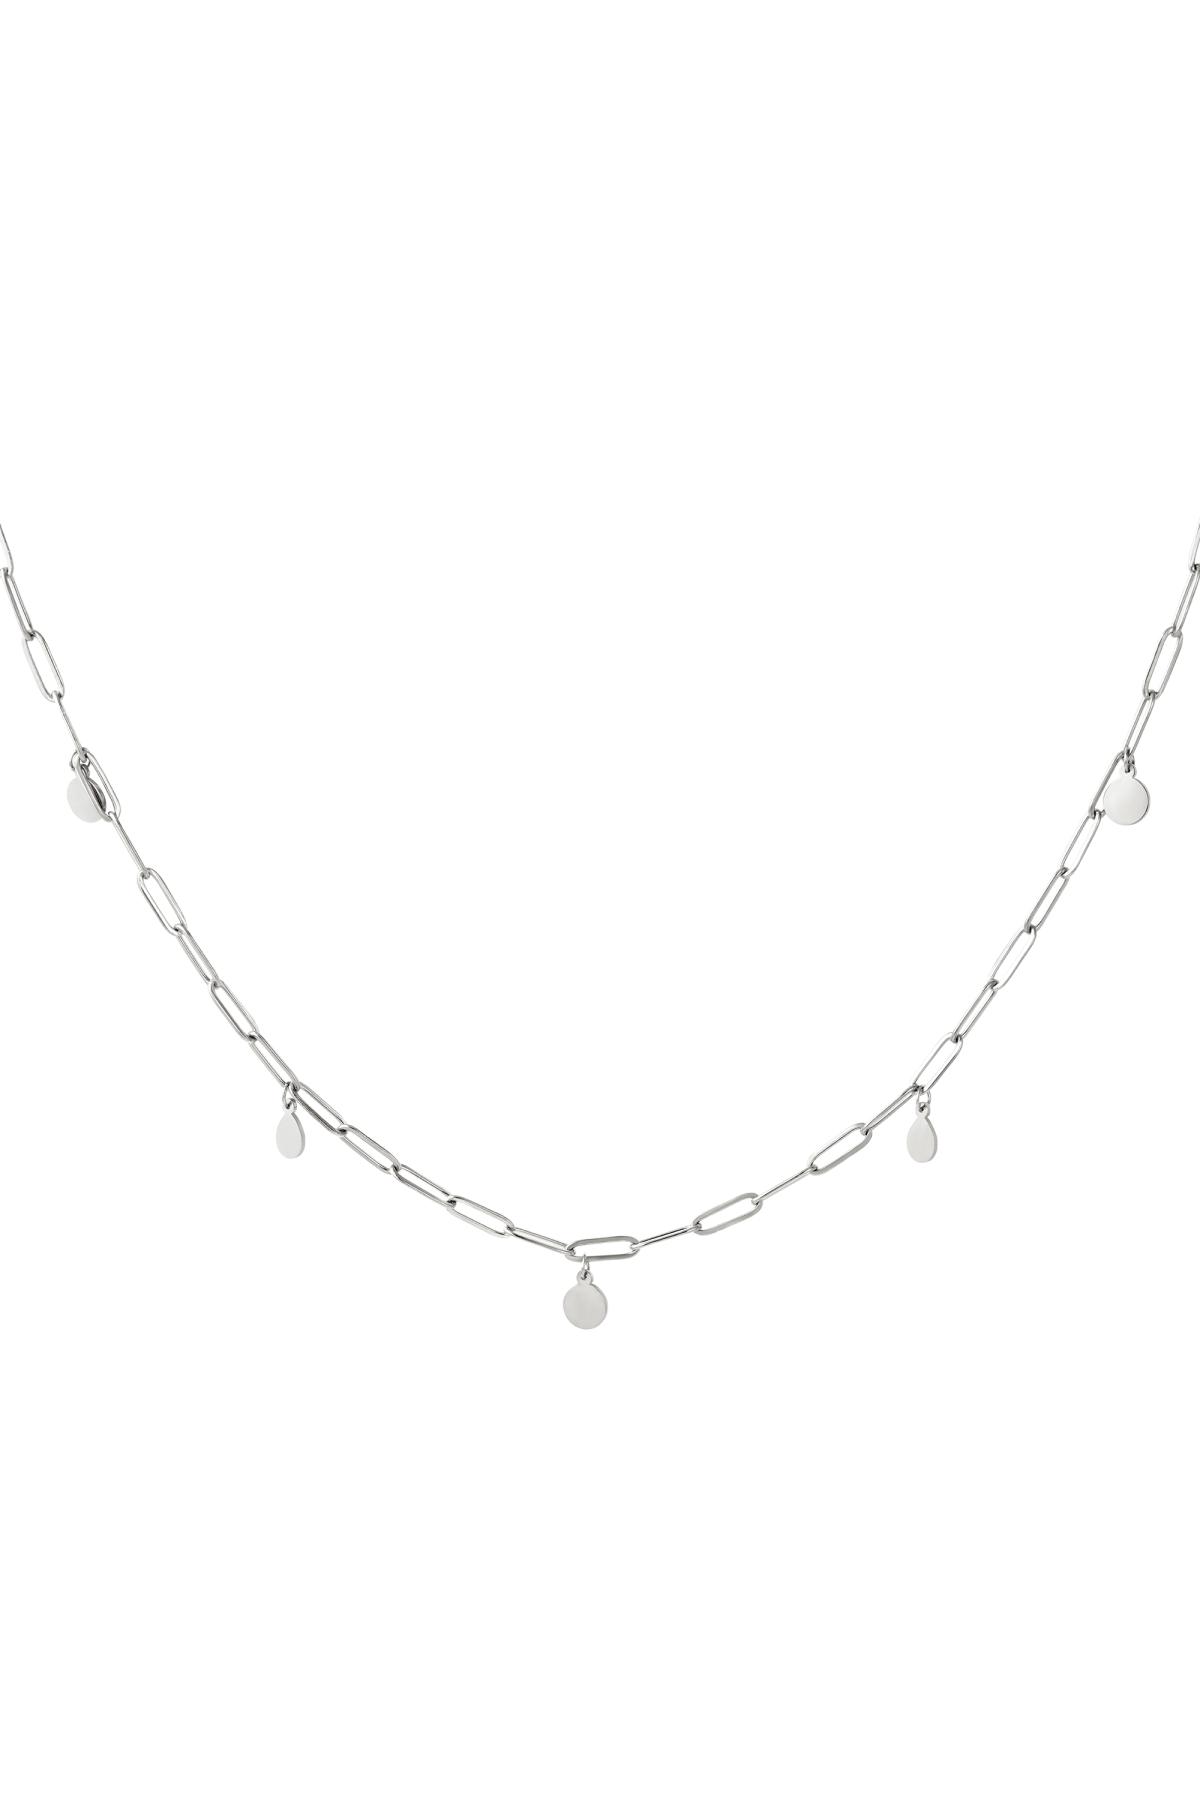 Silver / Stainless steel necklace confetti Silver 